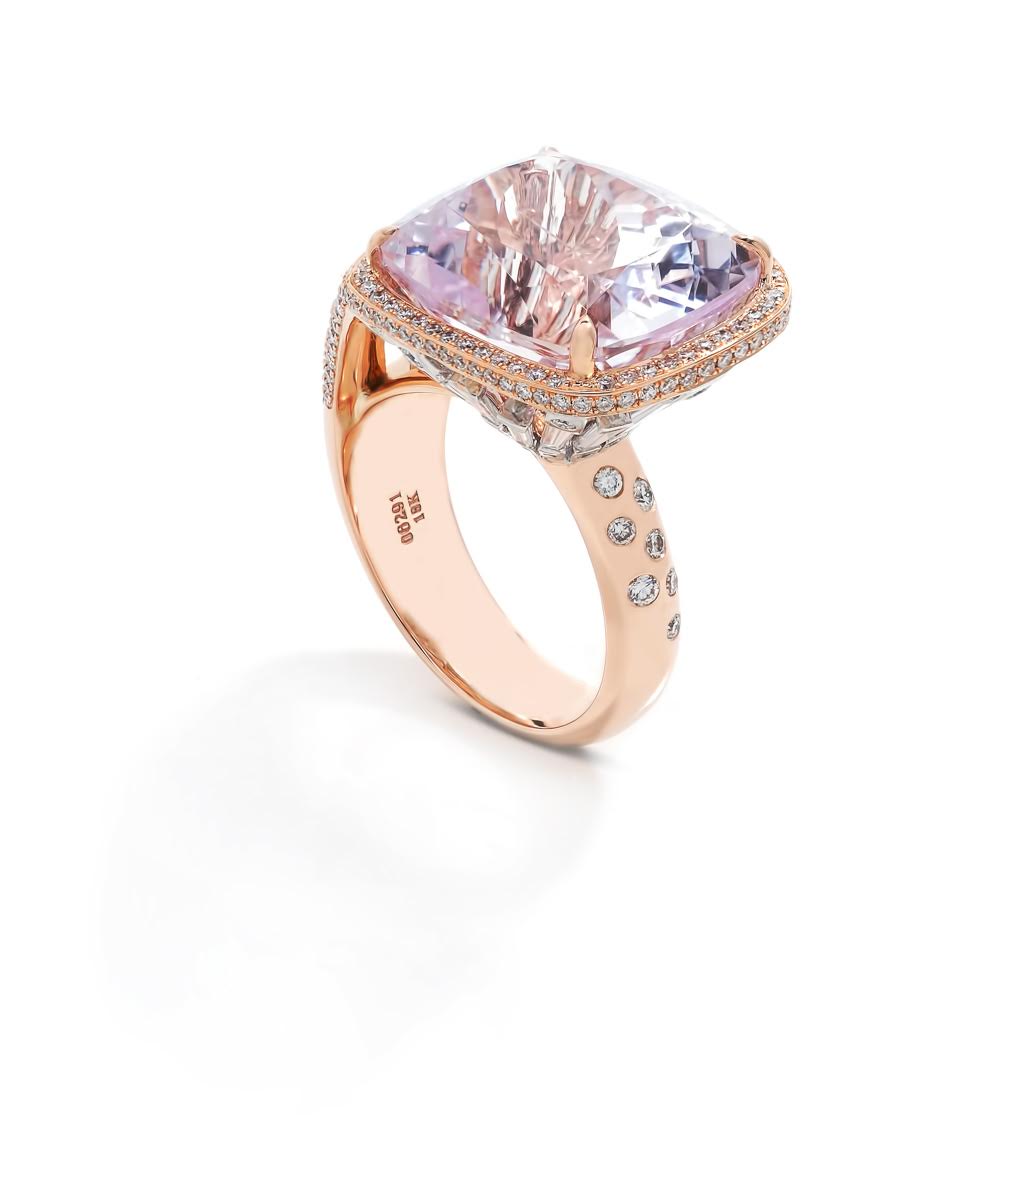  Trinity ring in 18k rose gold with a cushion-cut kunzite and diamonds.&nbsp; 